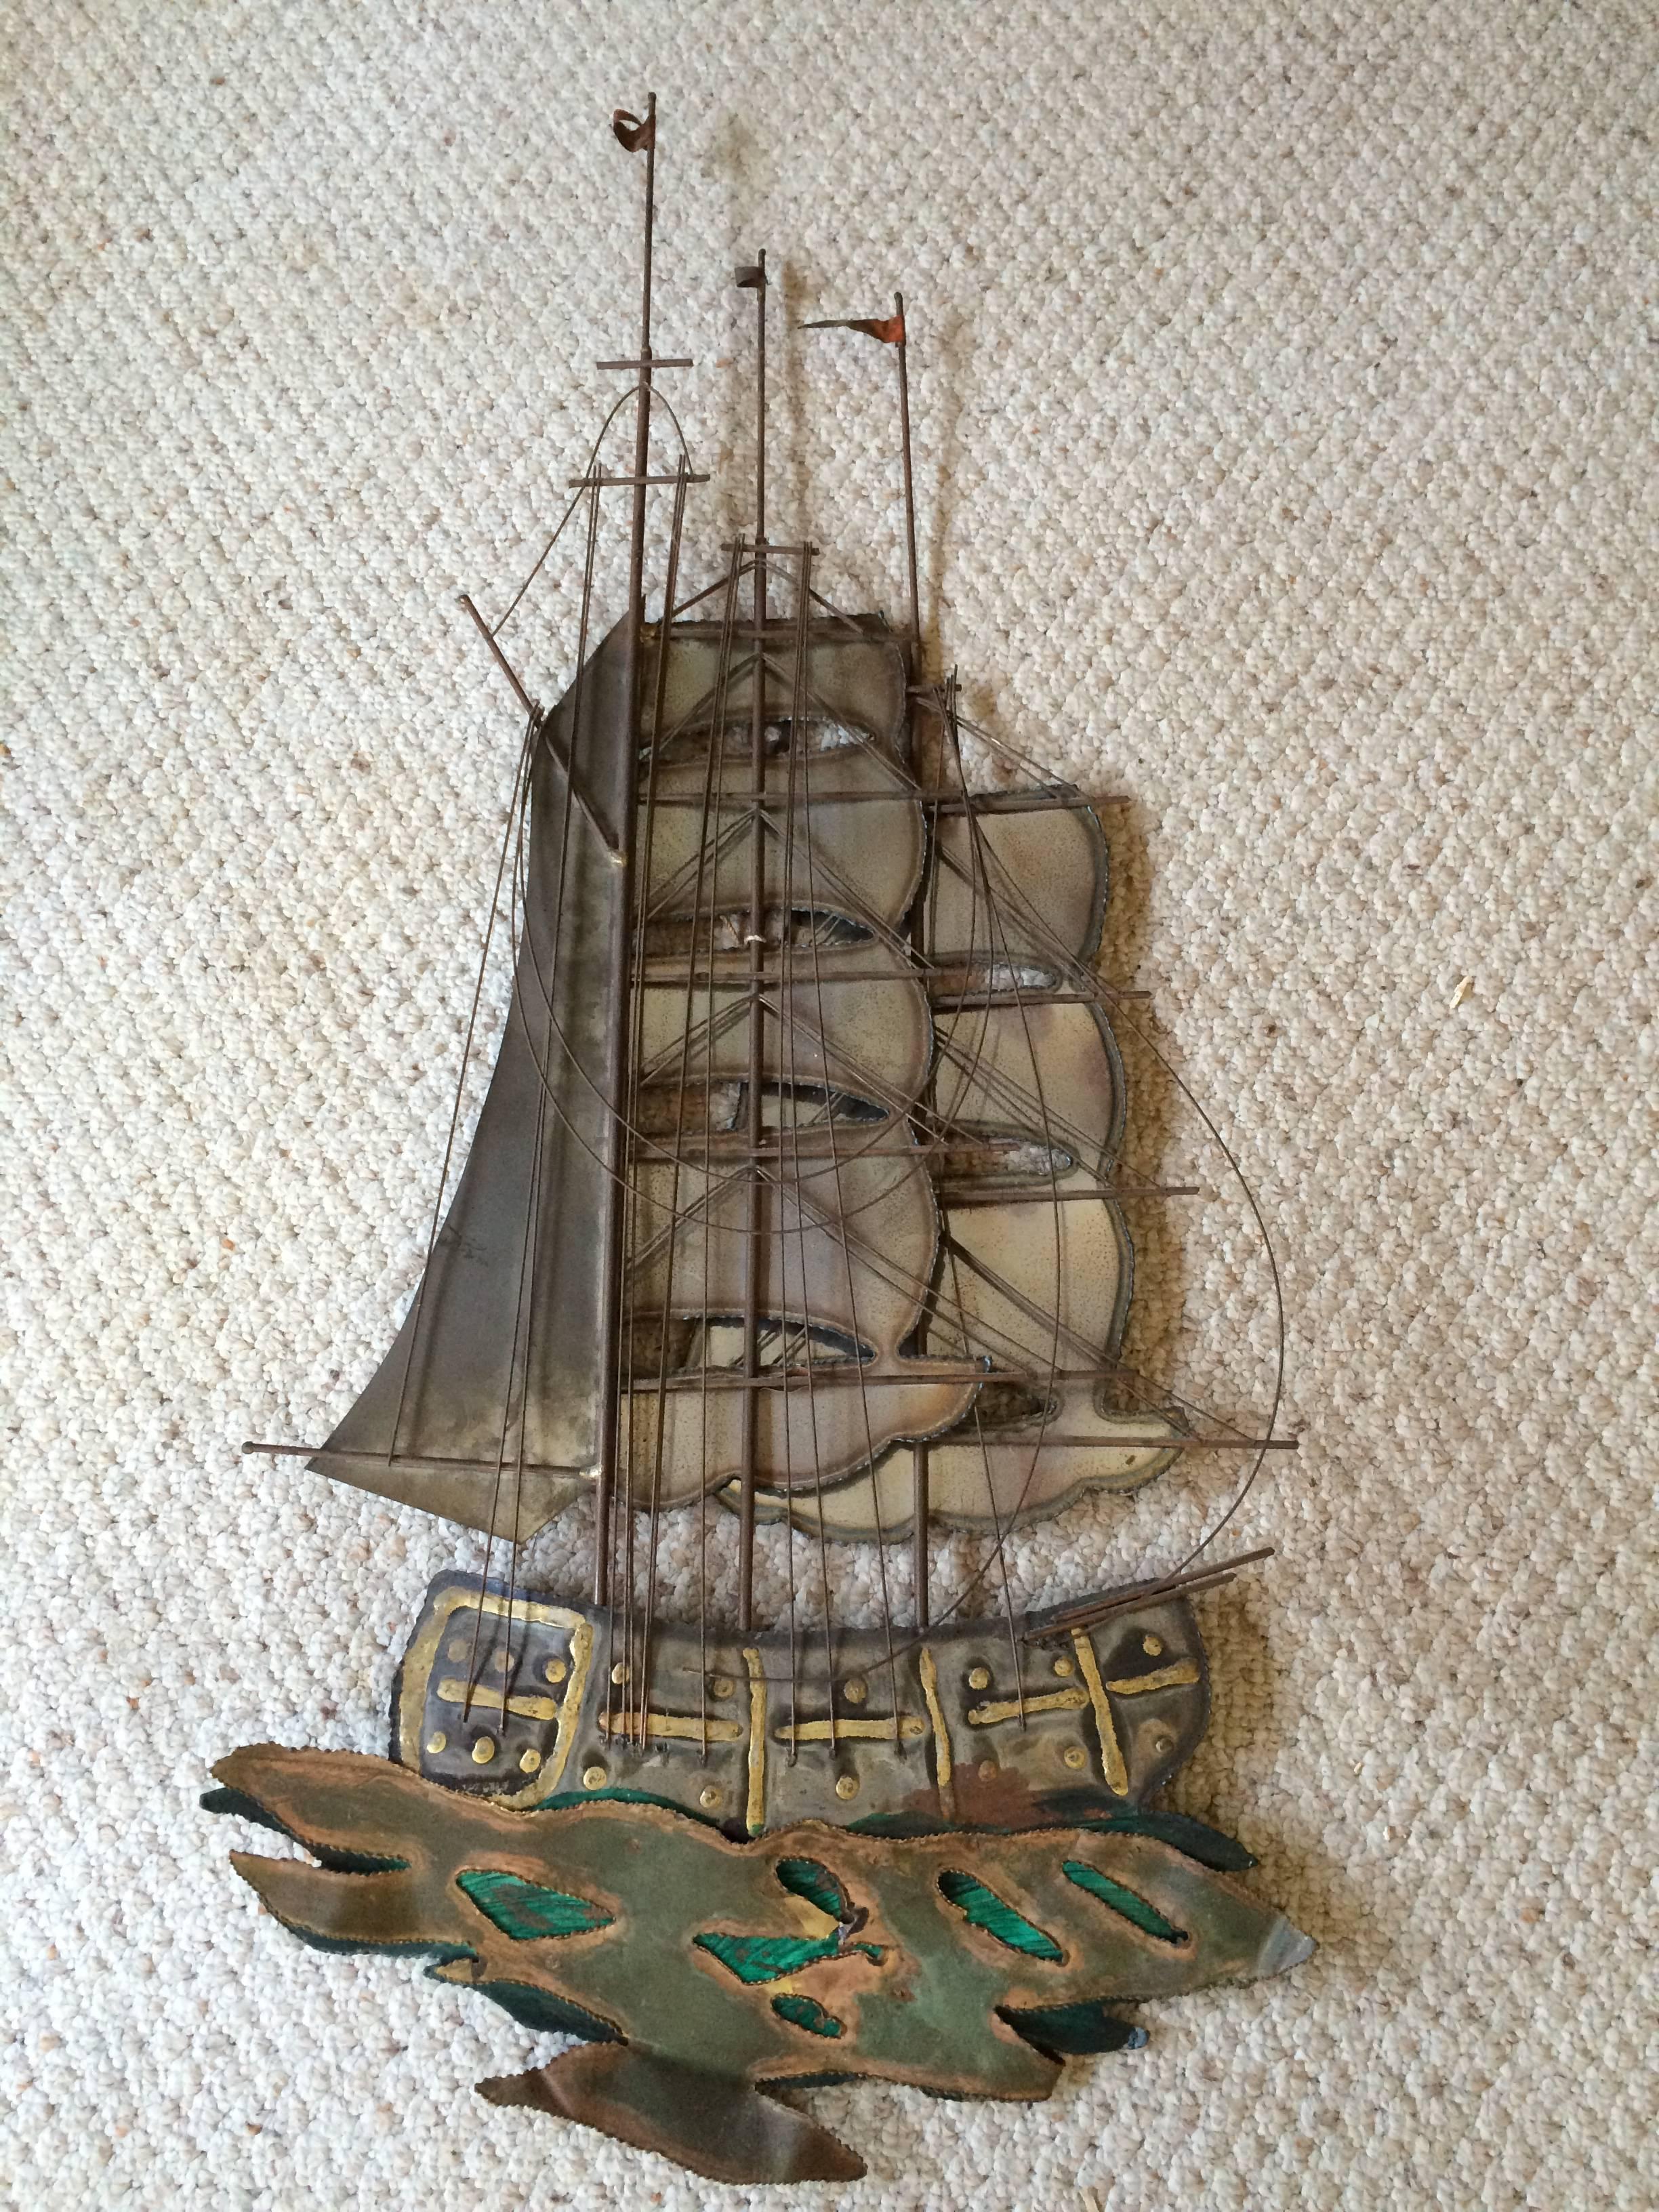 Brutalist Mid Century Ship Wall Sculpture. Mixed torch cut metals with painted accents. 